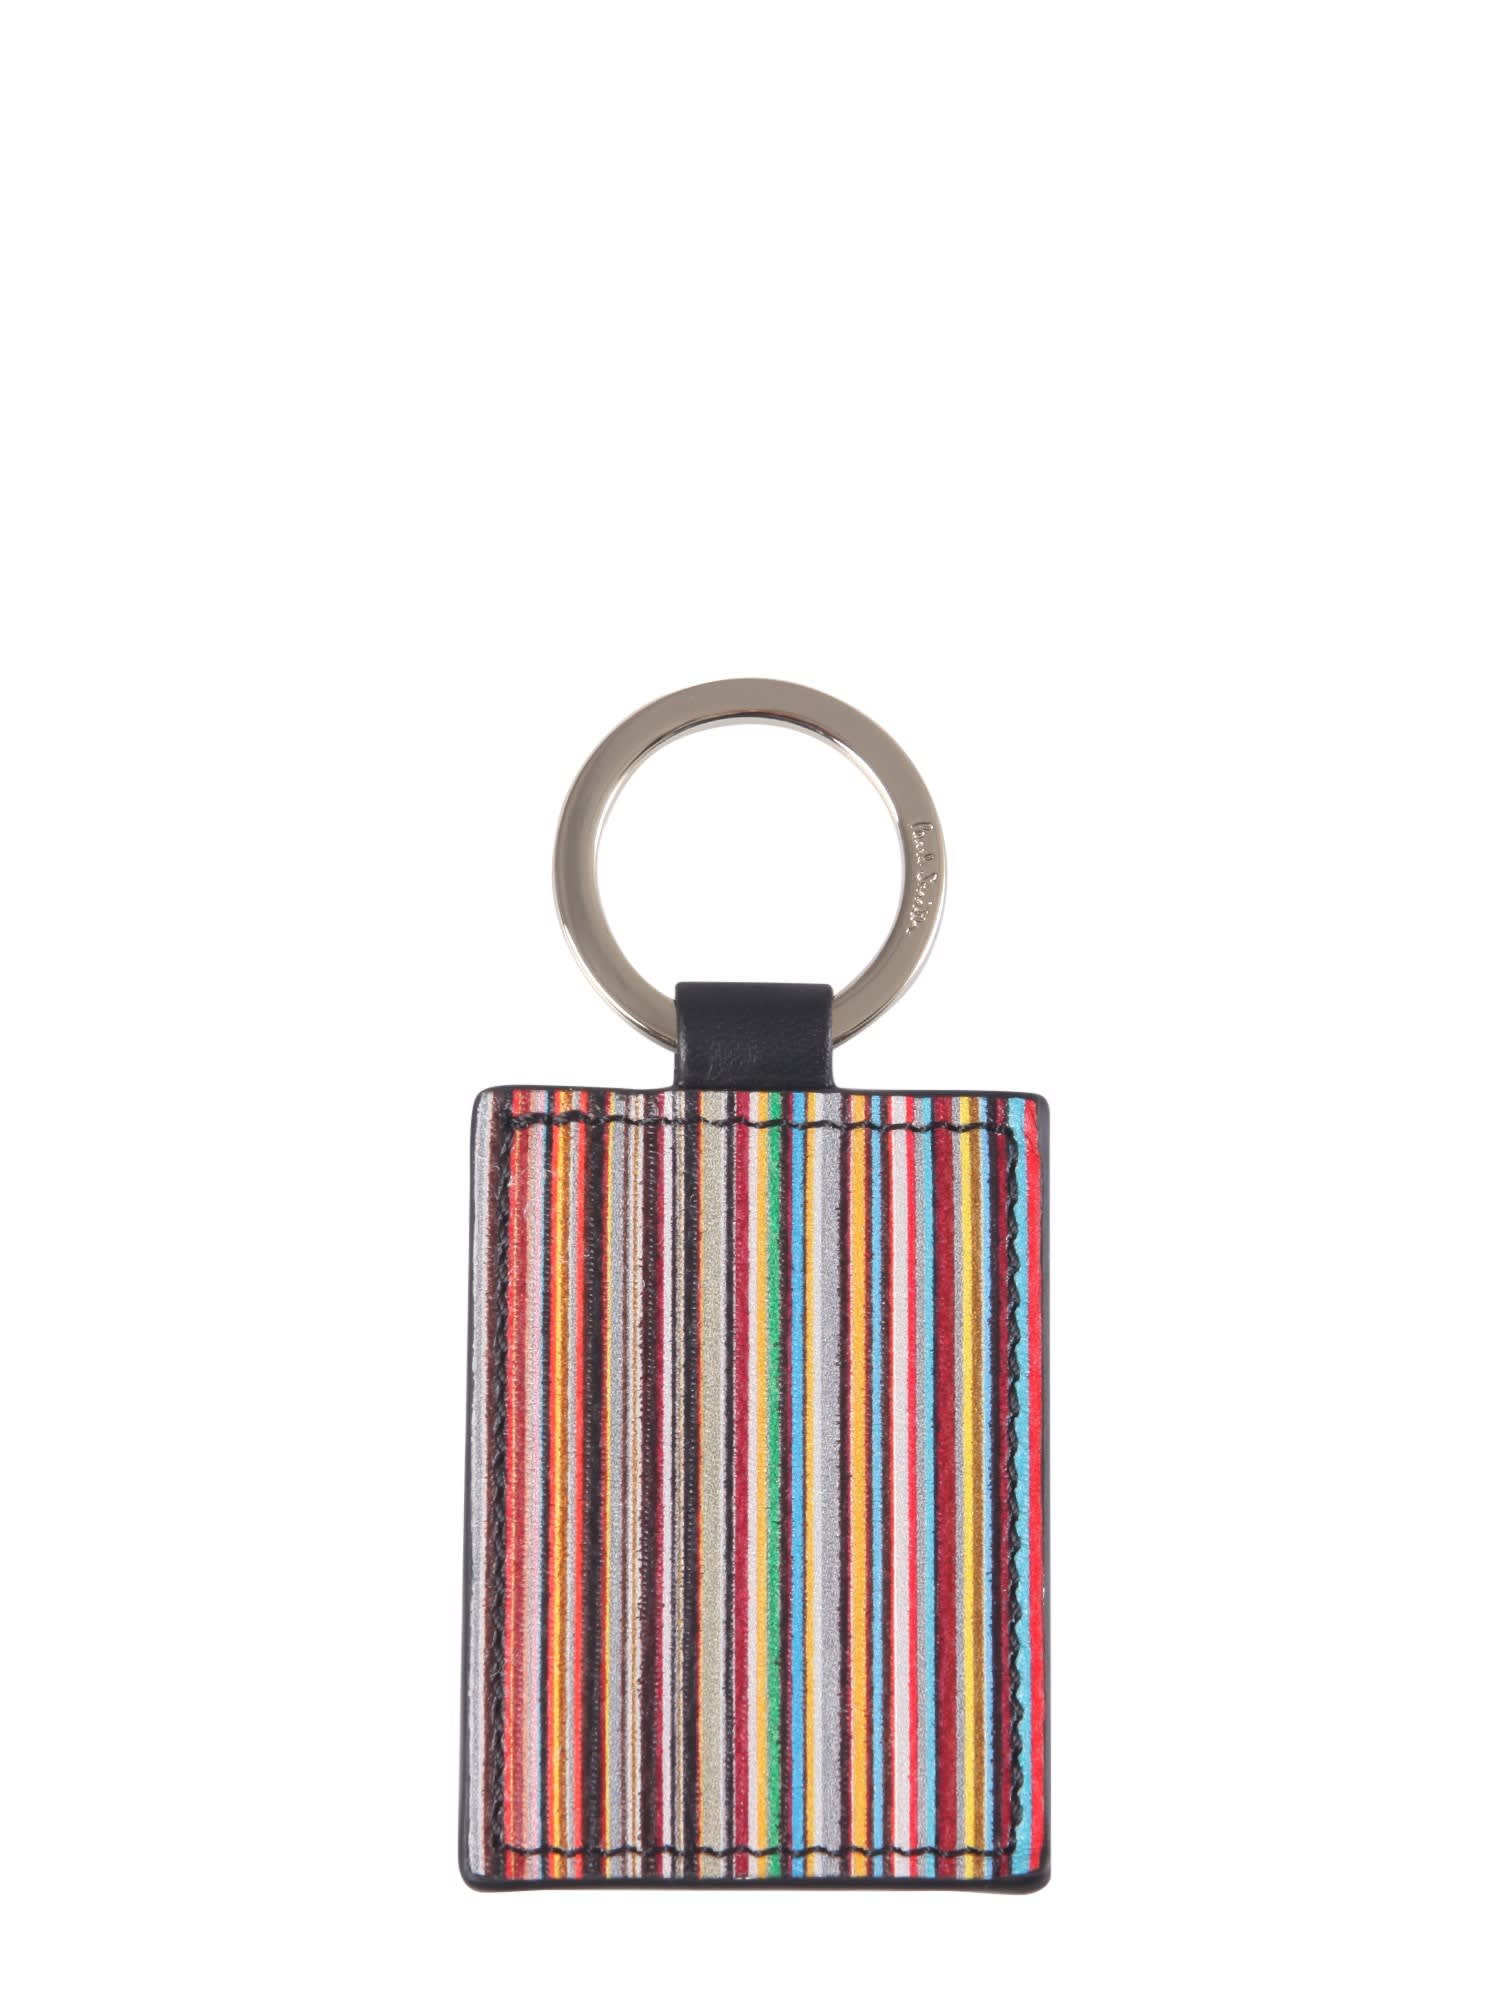 Paul Smith Leather Key Ring